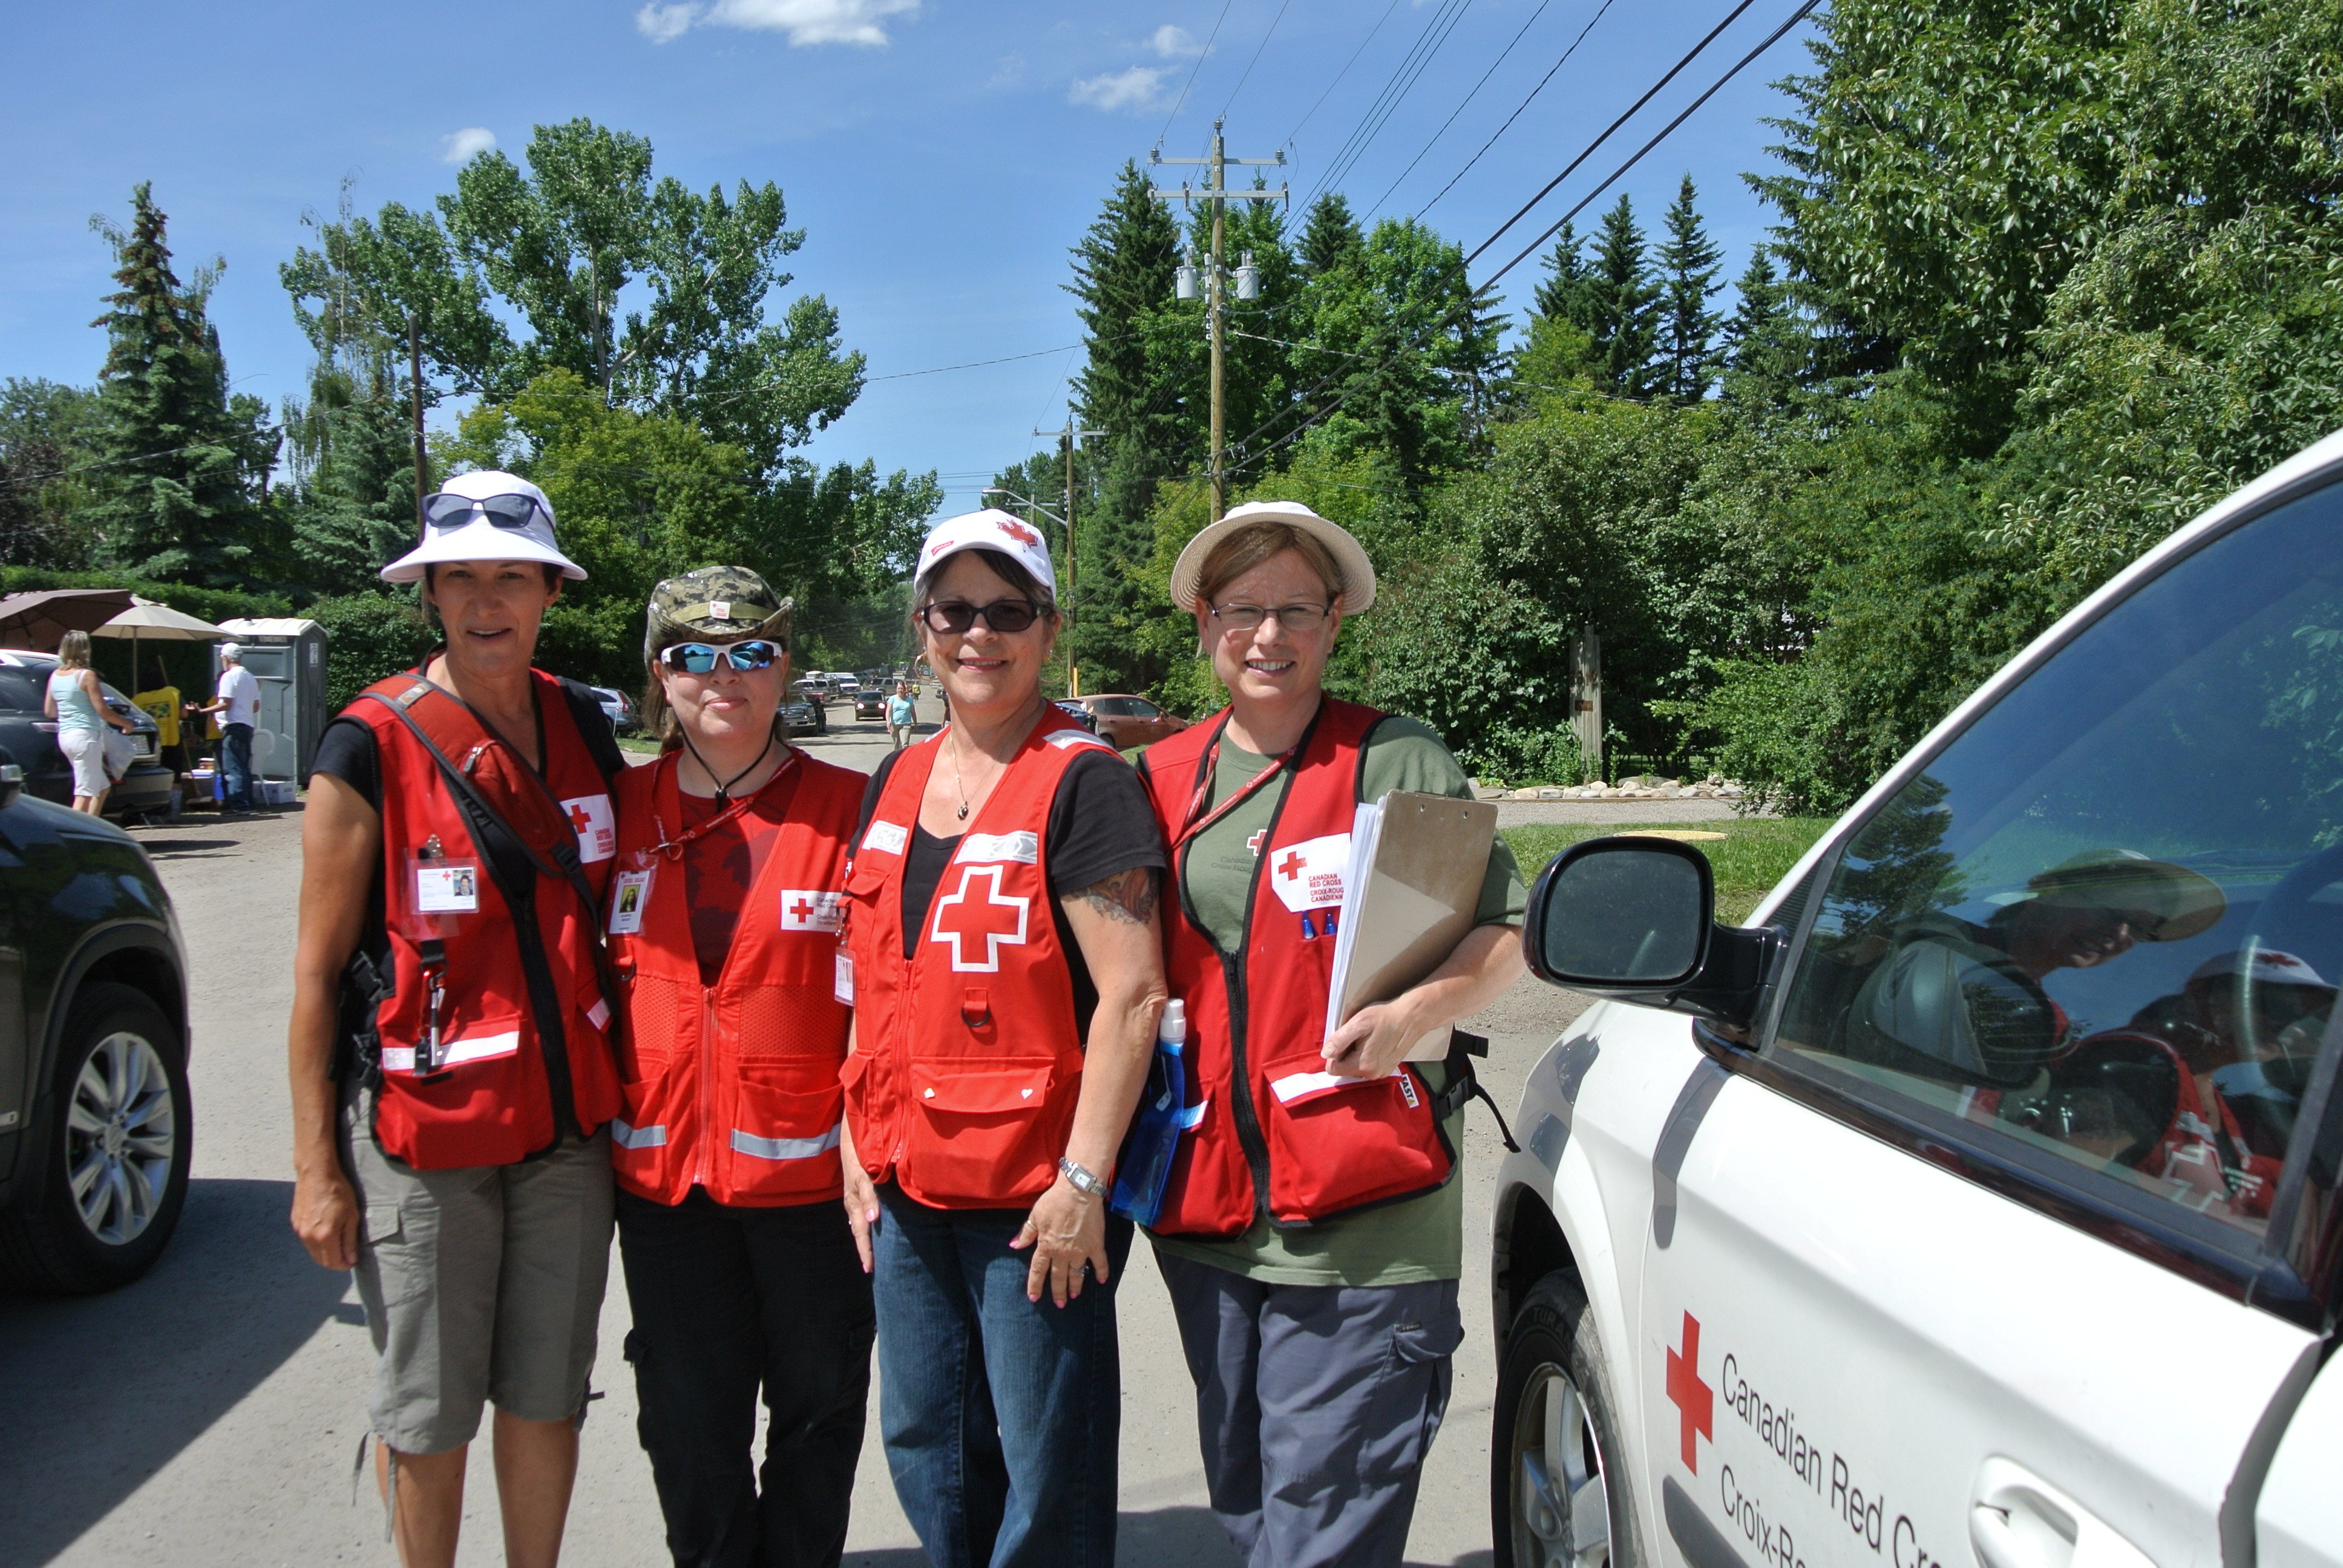 Team of Red Cross volunteers doing outreach in Bowness